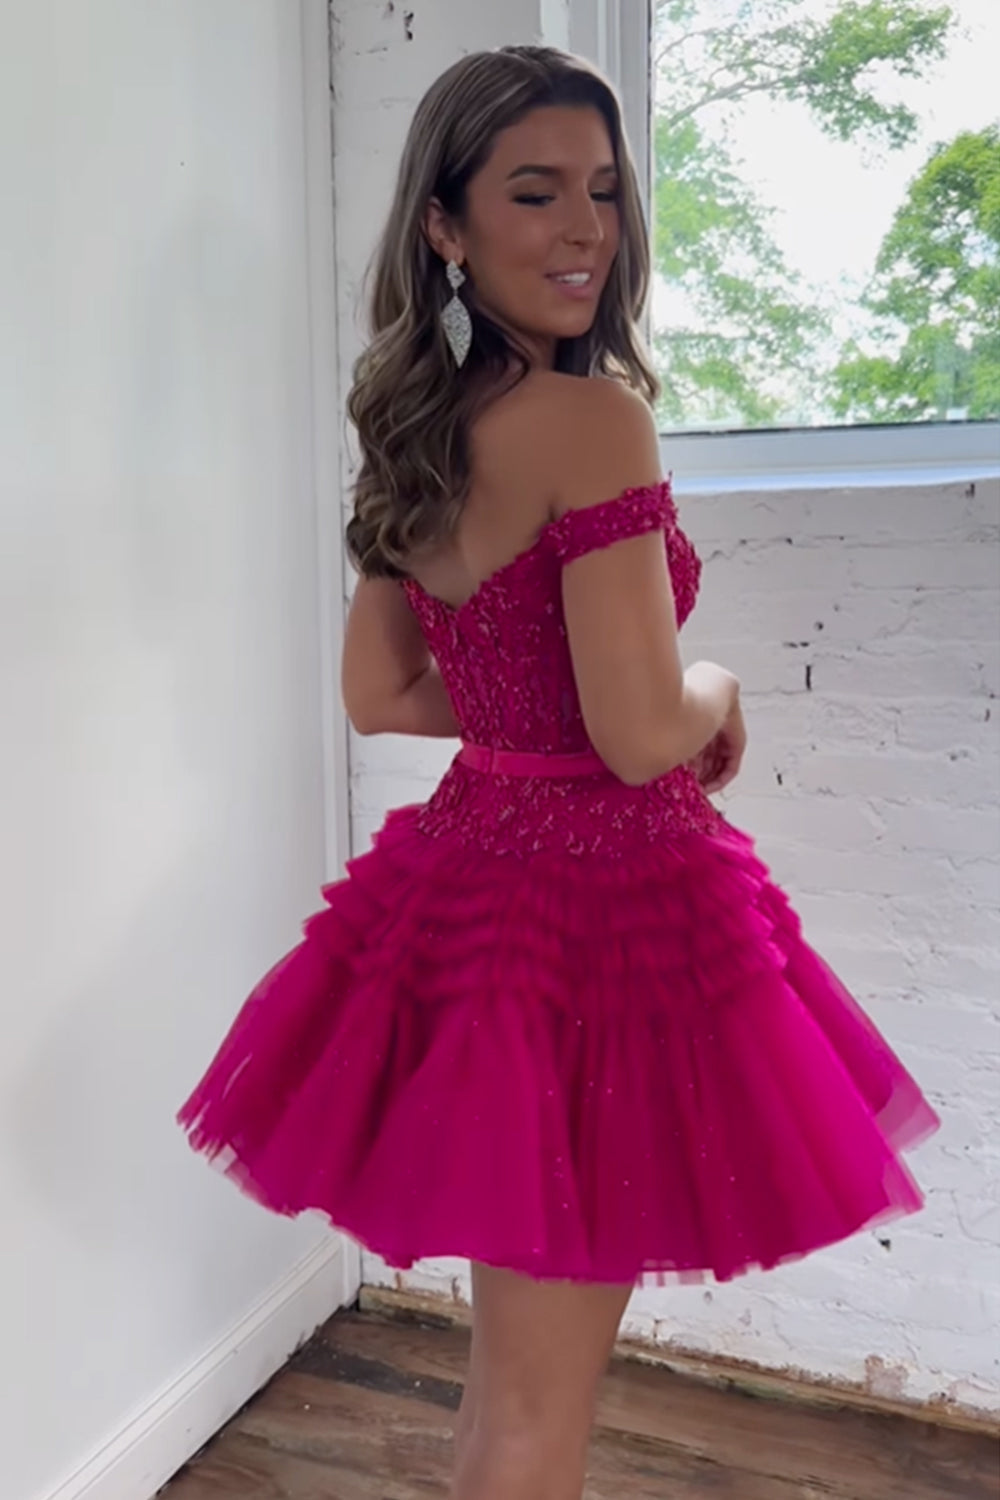 Sadie | A Line Tulle Tiered Short Homecoming Dress